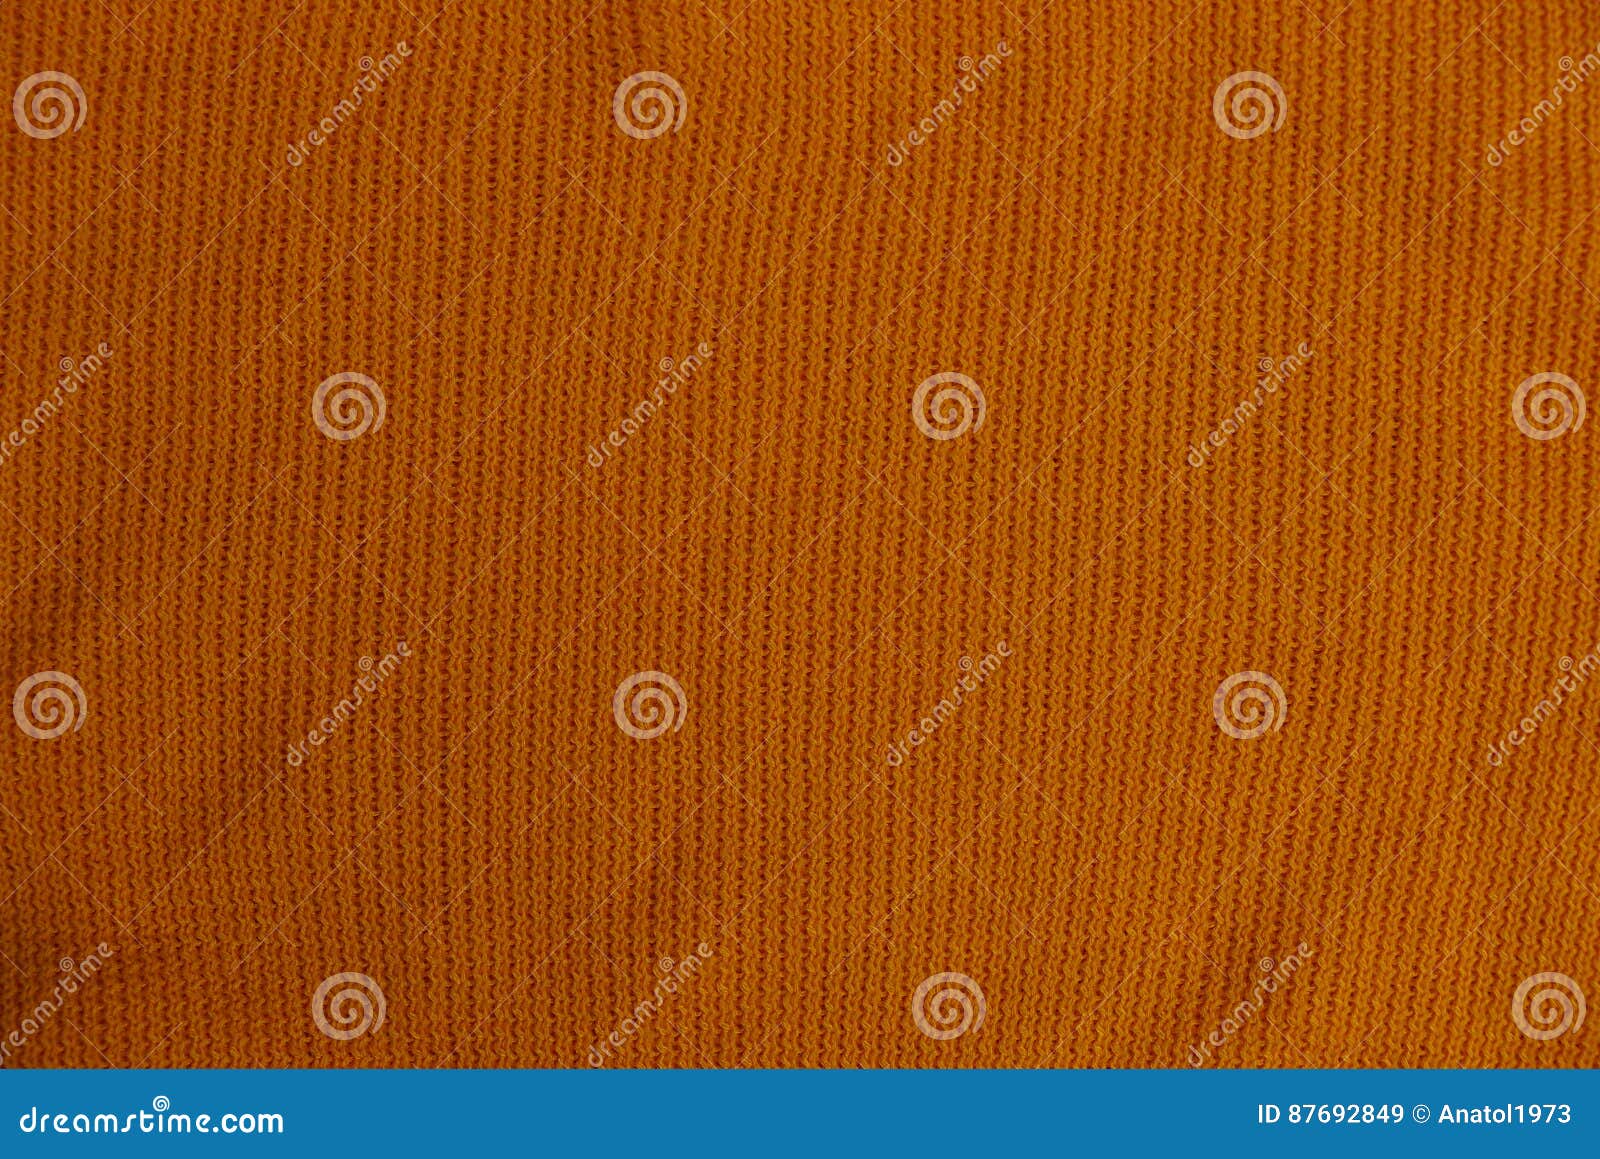 Brown Fabric Texture from Clothes Stock Image - Image of plane ...